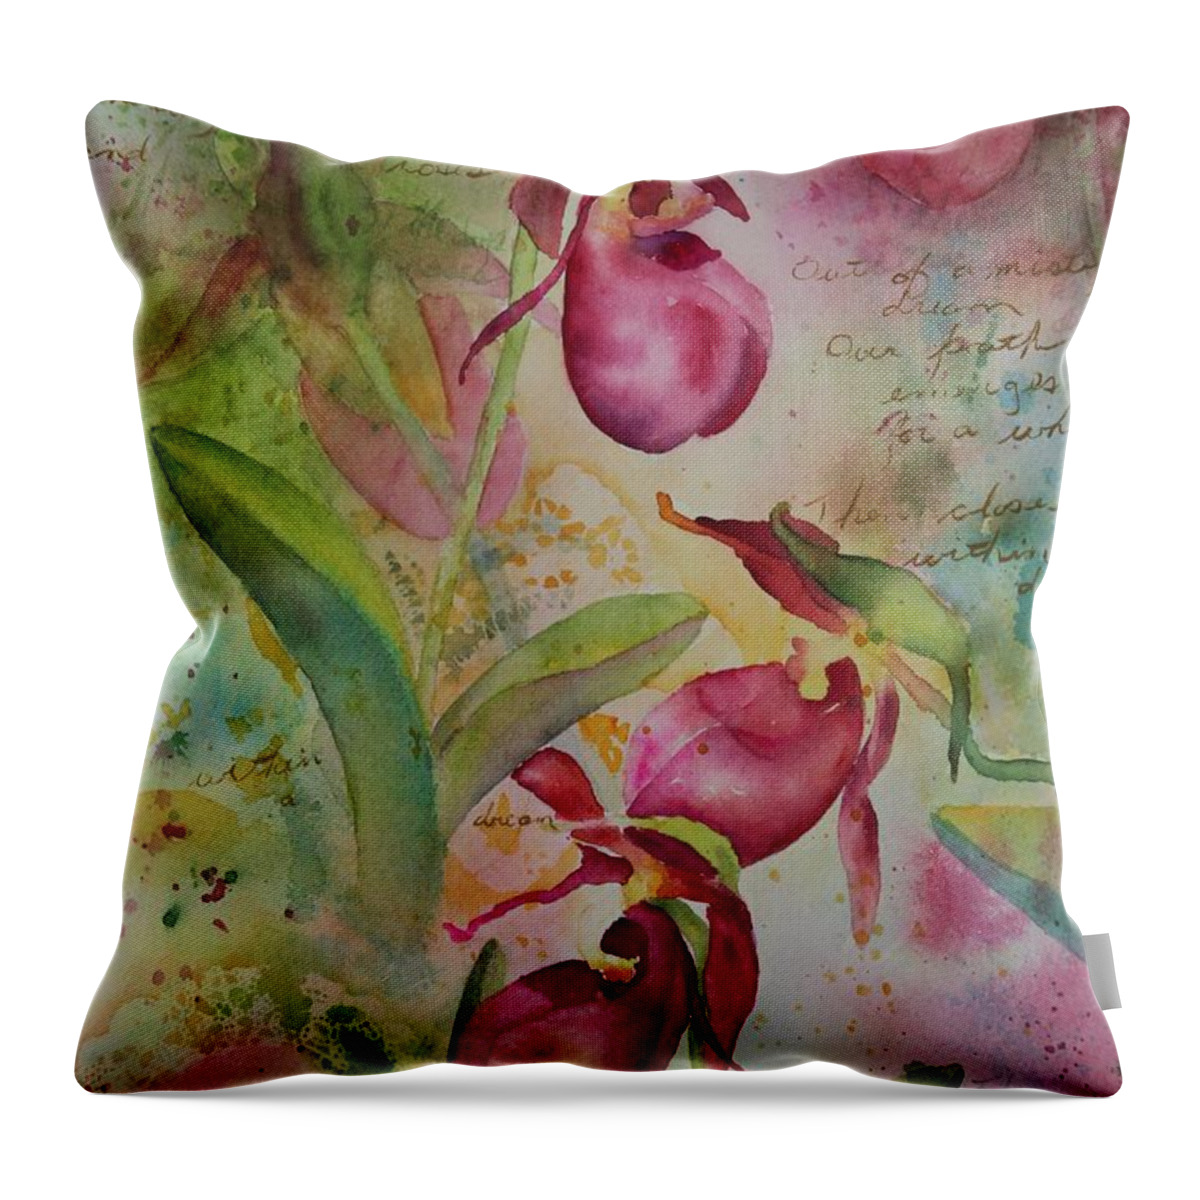 Ladyslippers Throw Pillow featuring the painting Days of Wine and Roses by Ruth Kamenev